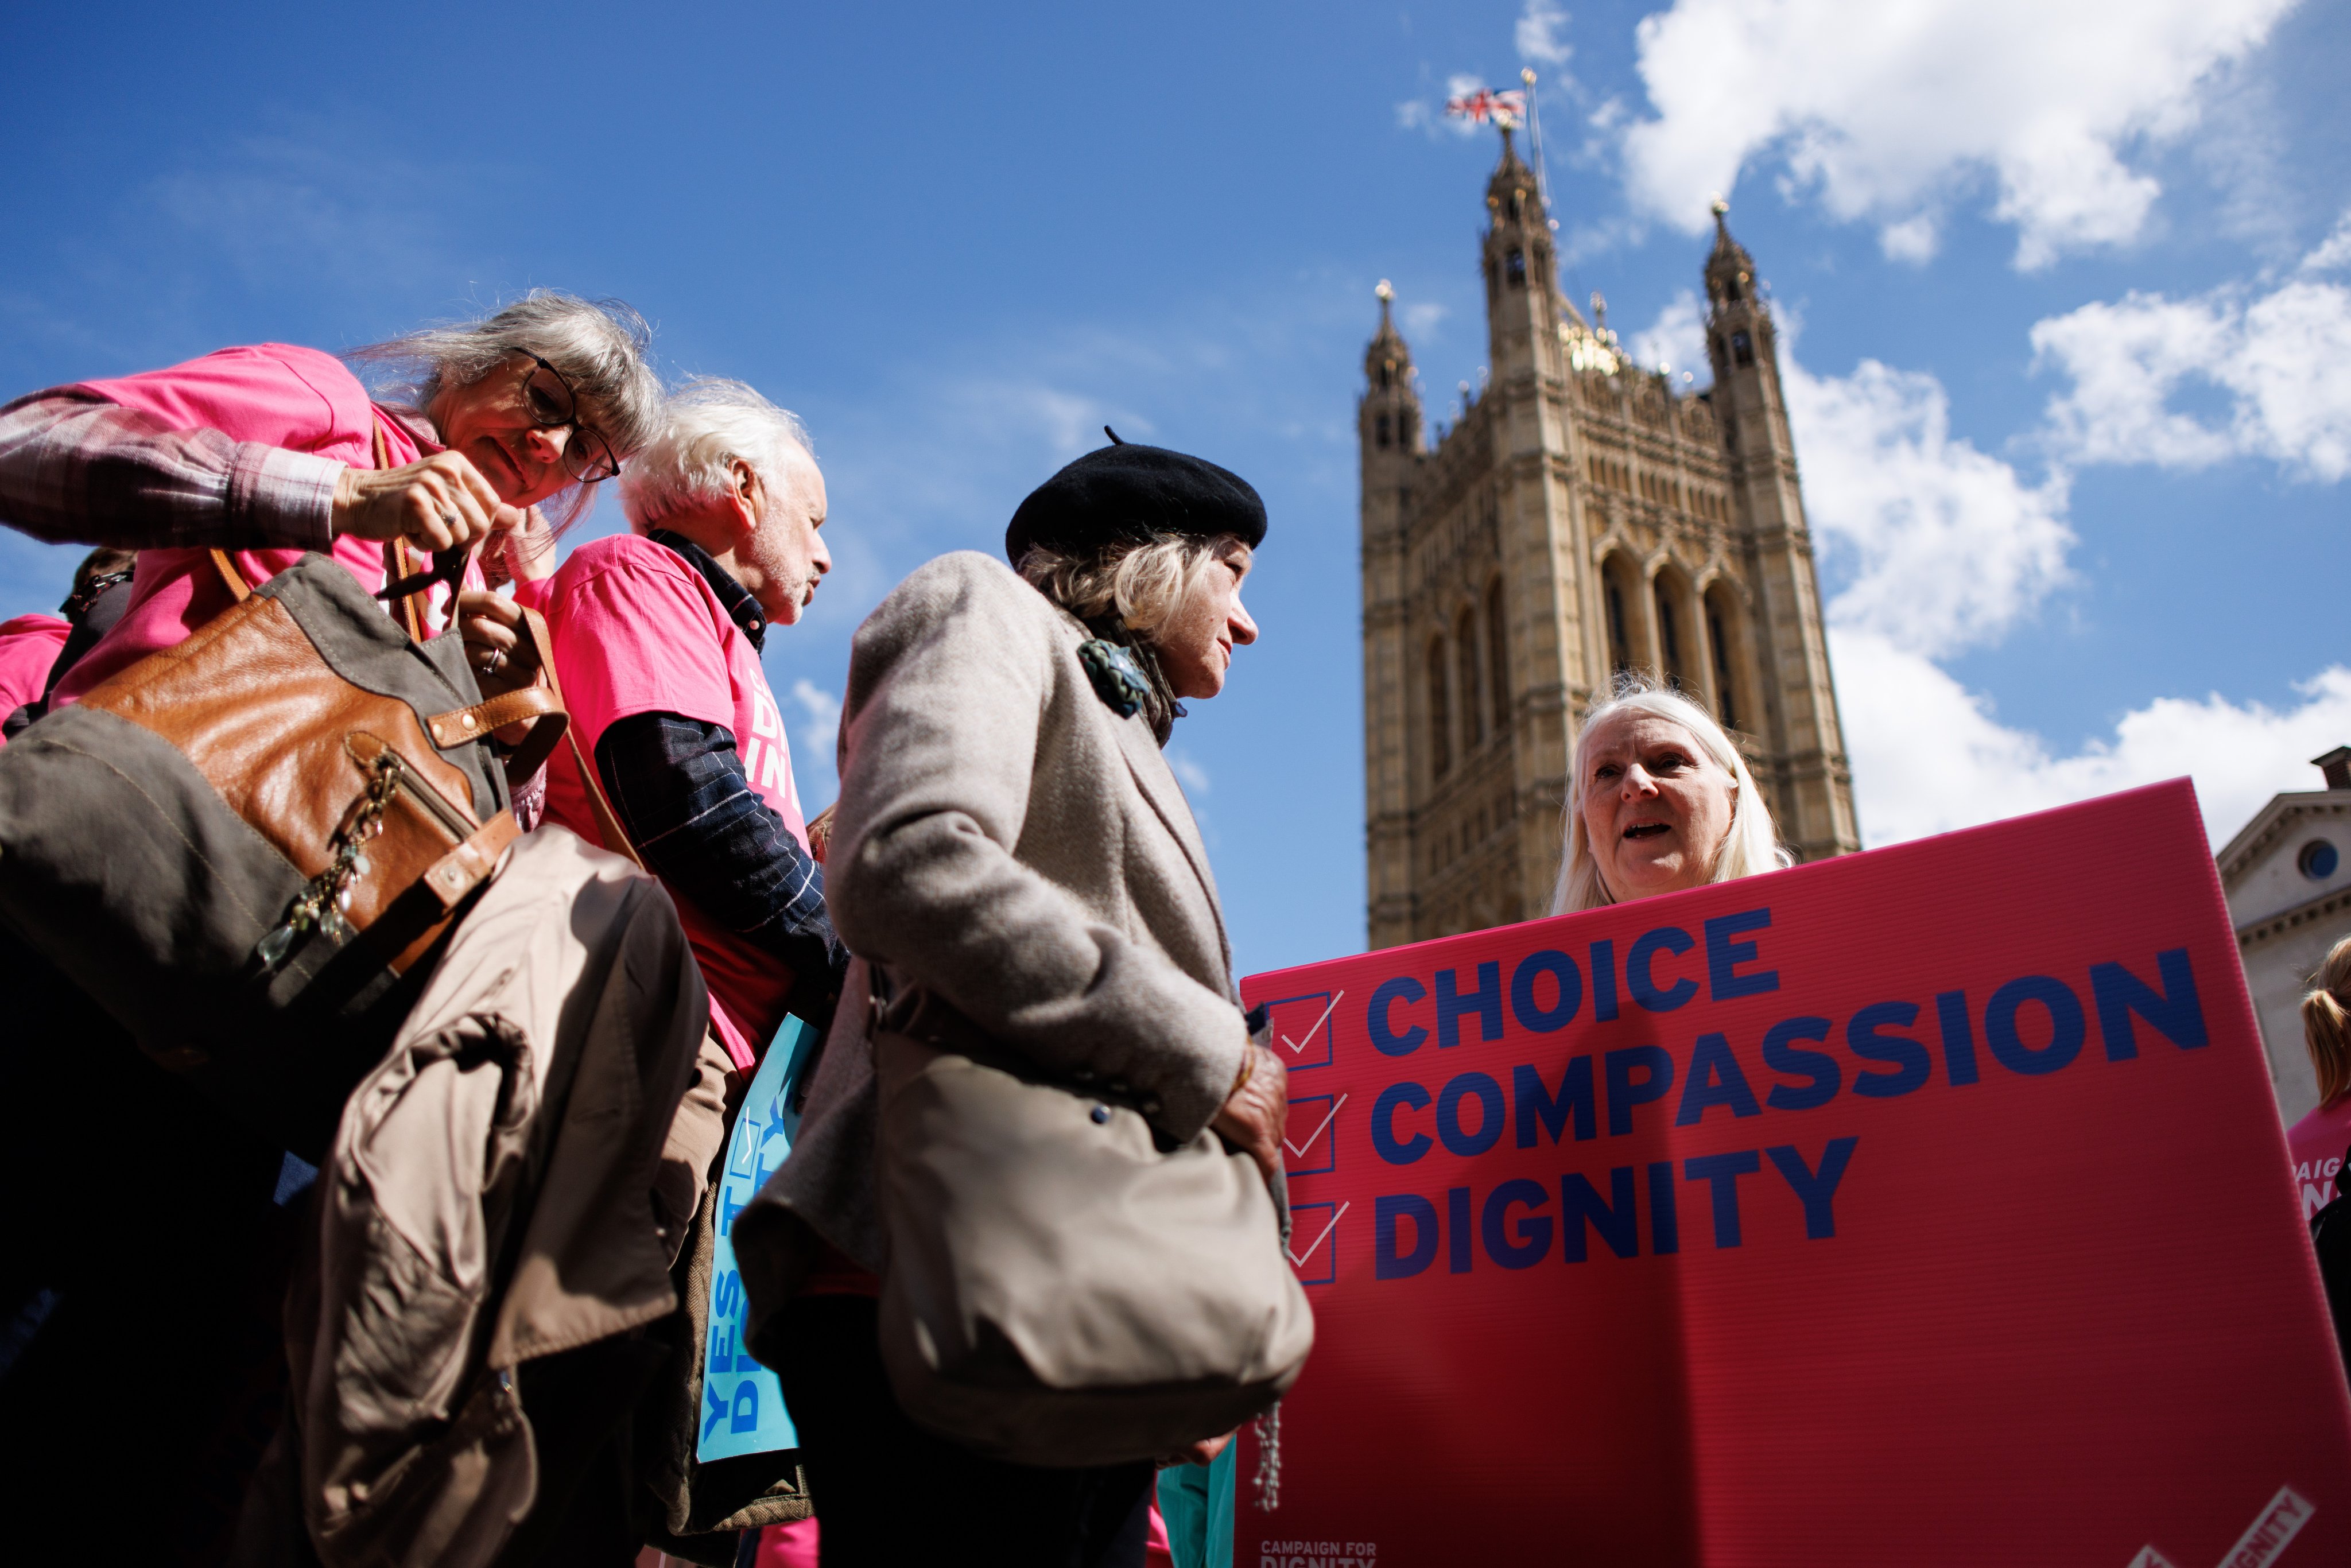 Pro-assisted dying campaigners gather outside the UK Houses of Parliament as MPs prepare to debate over changing the law on assisted dying, in London on April 29. Photo: EPA-EFE